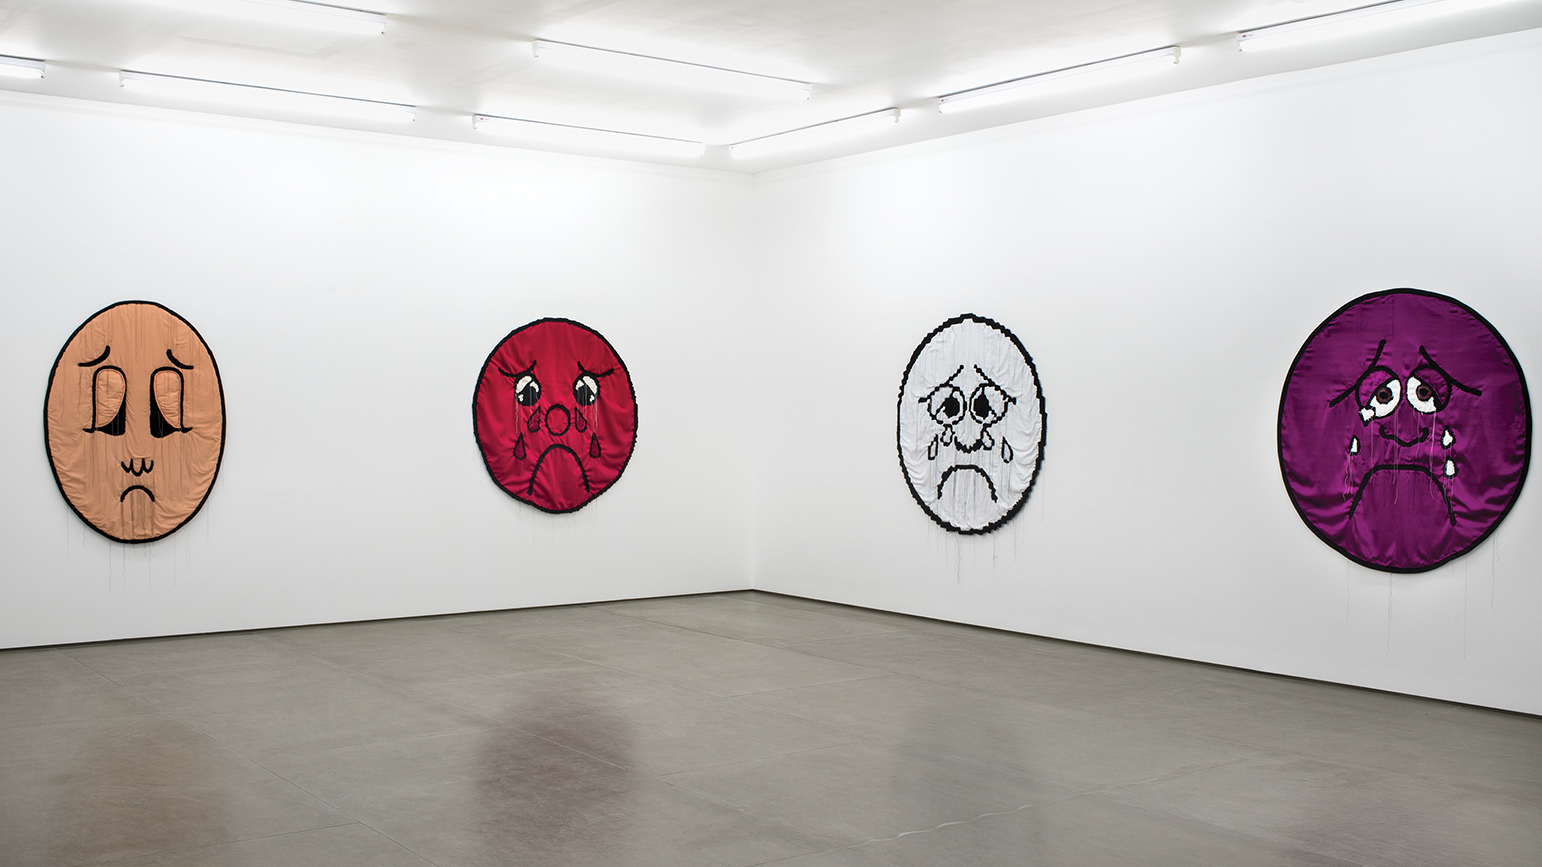 Gallery installation view with four large pain-scale faces constructed from fabric